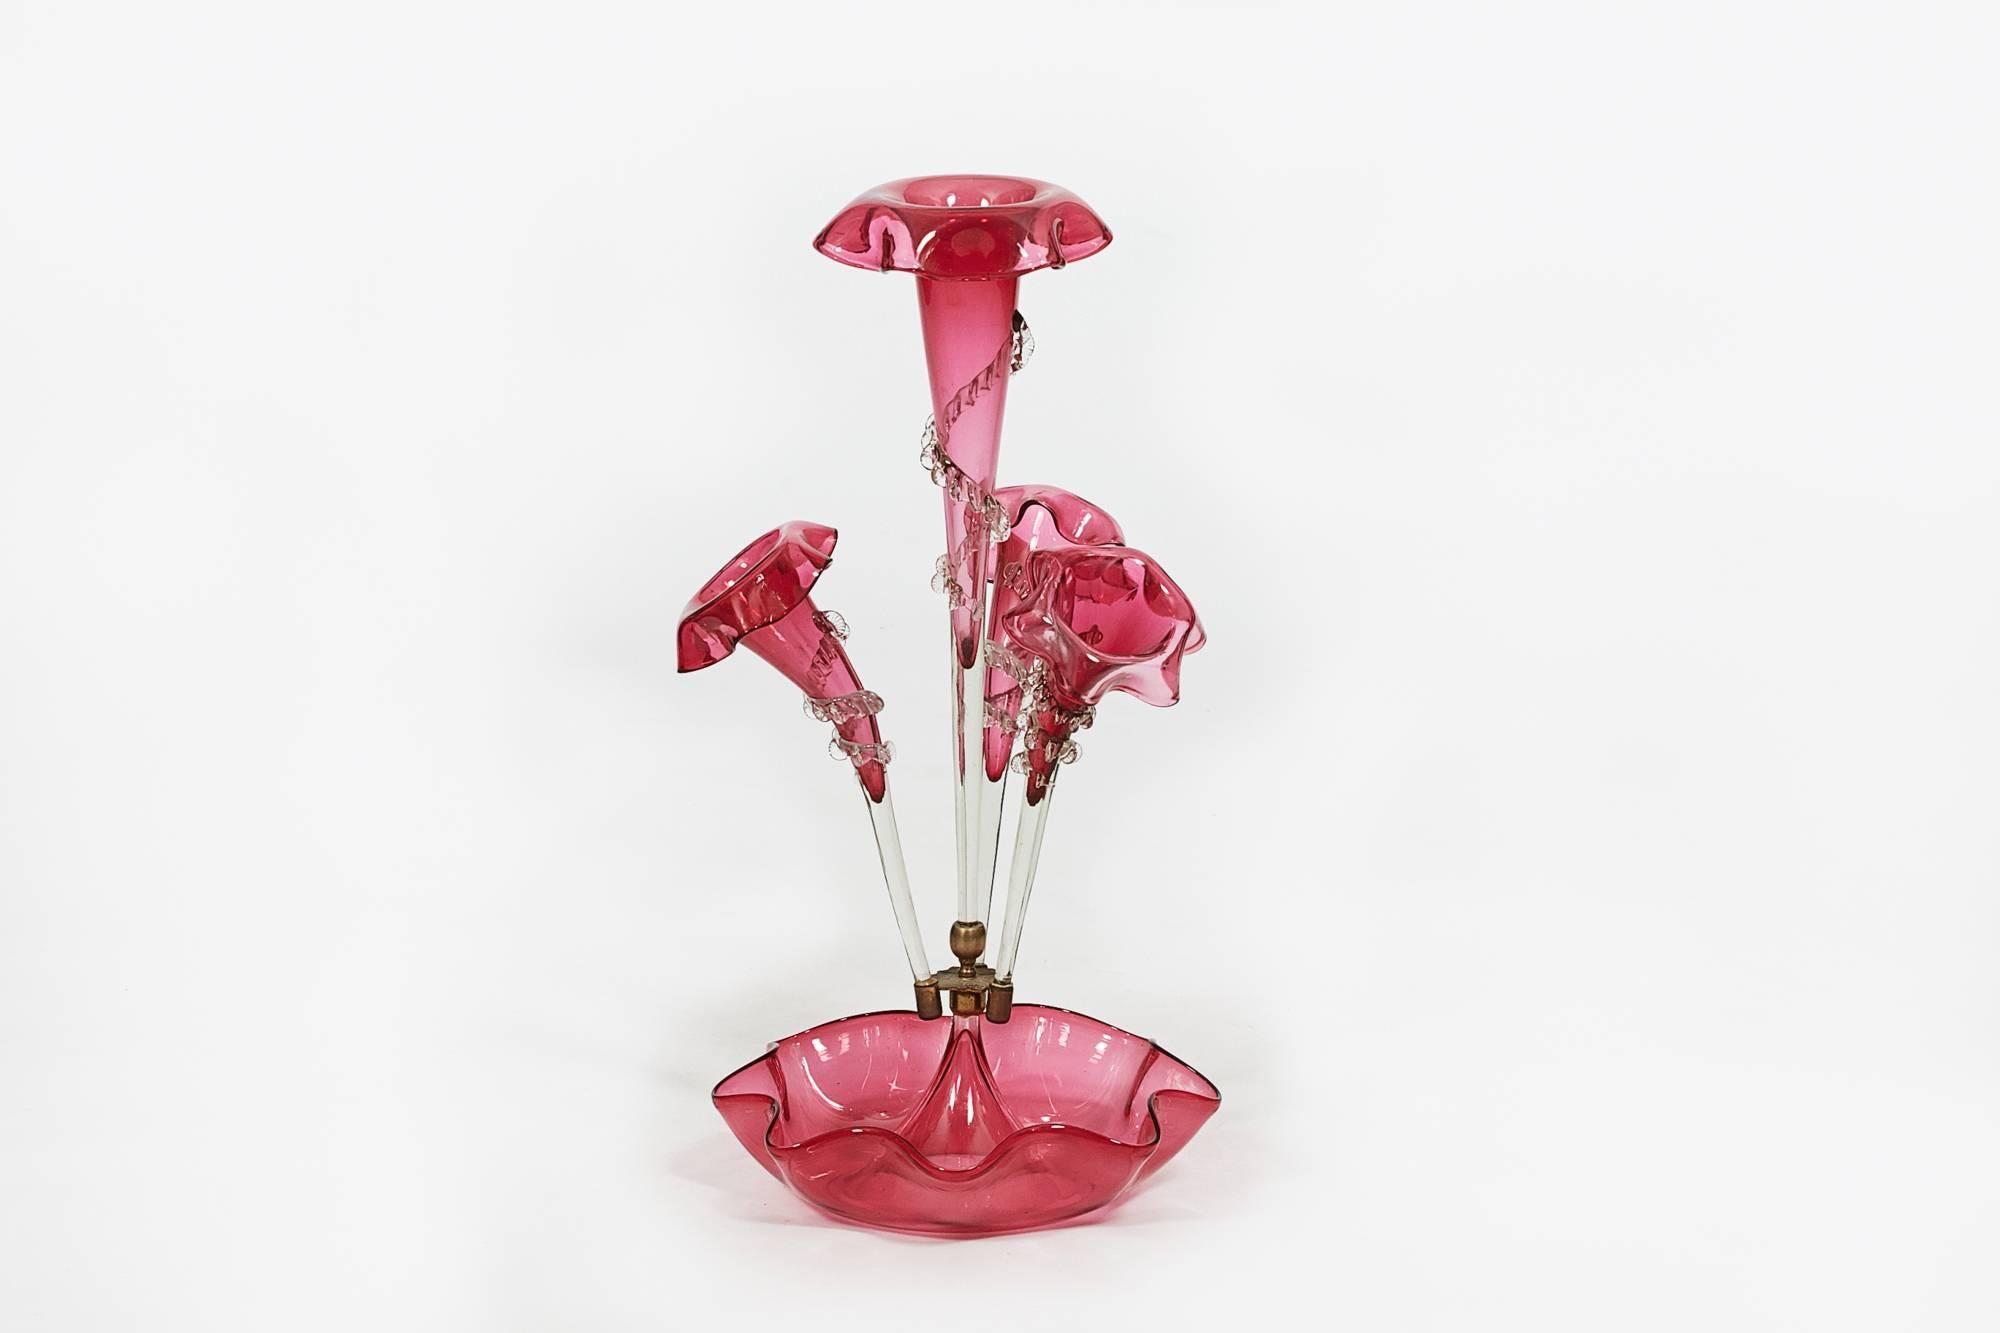 19th century cranberry glass epergne, with central large trumpet and three smaller trumpets on fluted bowl.